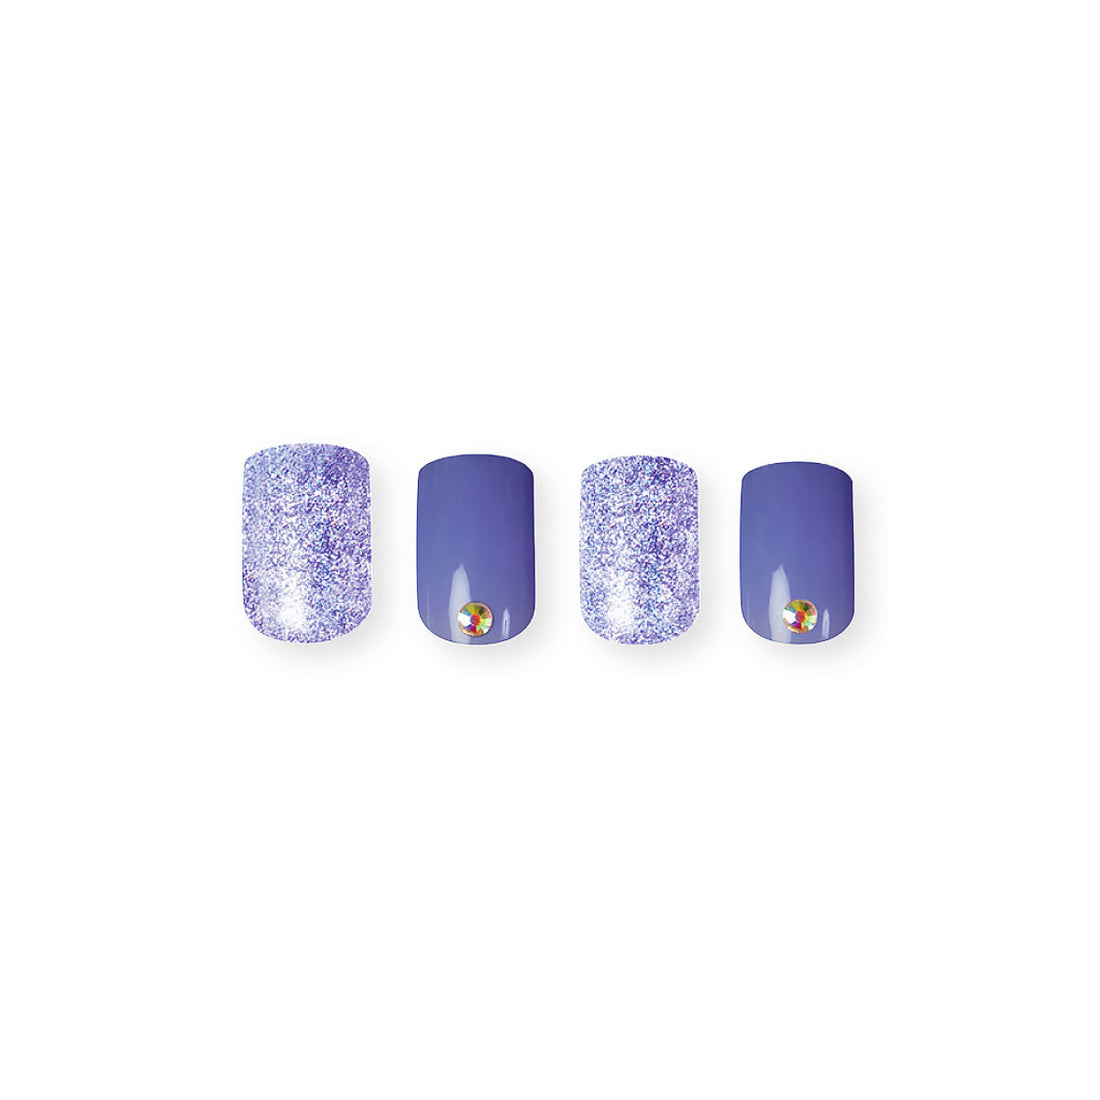 Tag: Purple Press On Nails with Glue Short square Nails